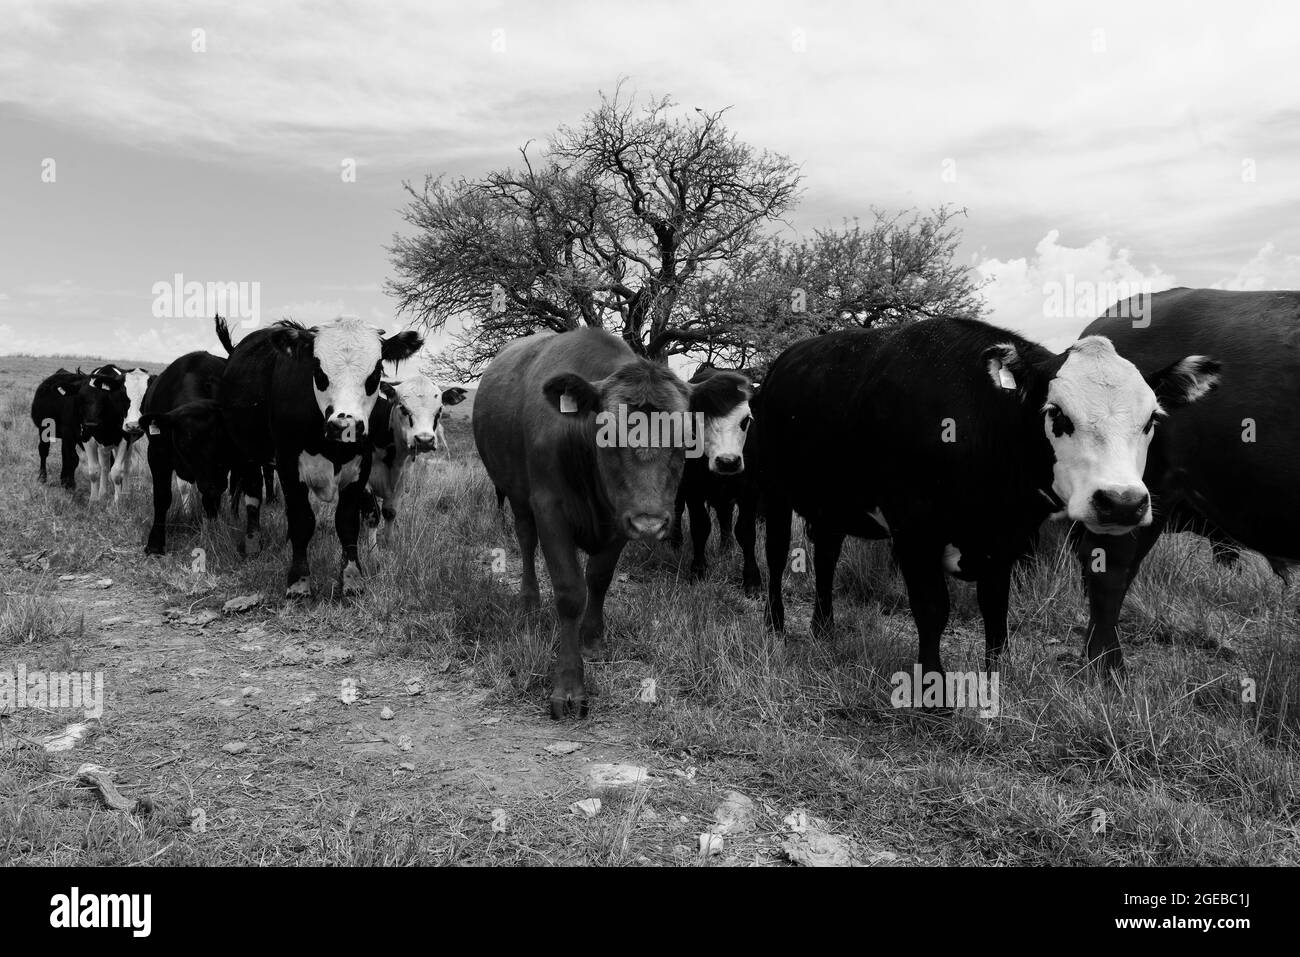 Cows raised with natural pastures, meat production in the Argentine countryside, La Pampa Province, Argentina. Stock Photo